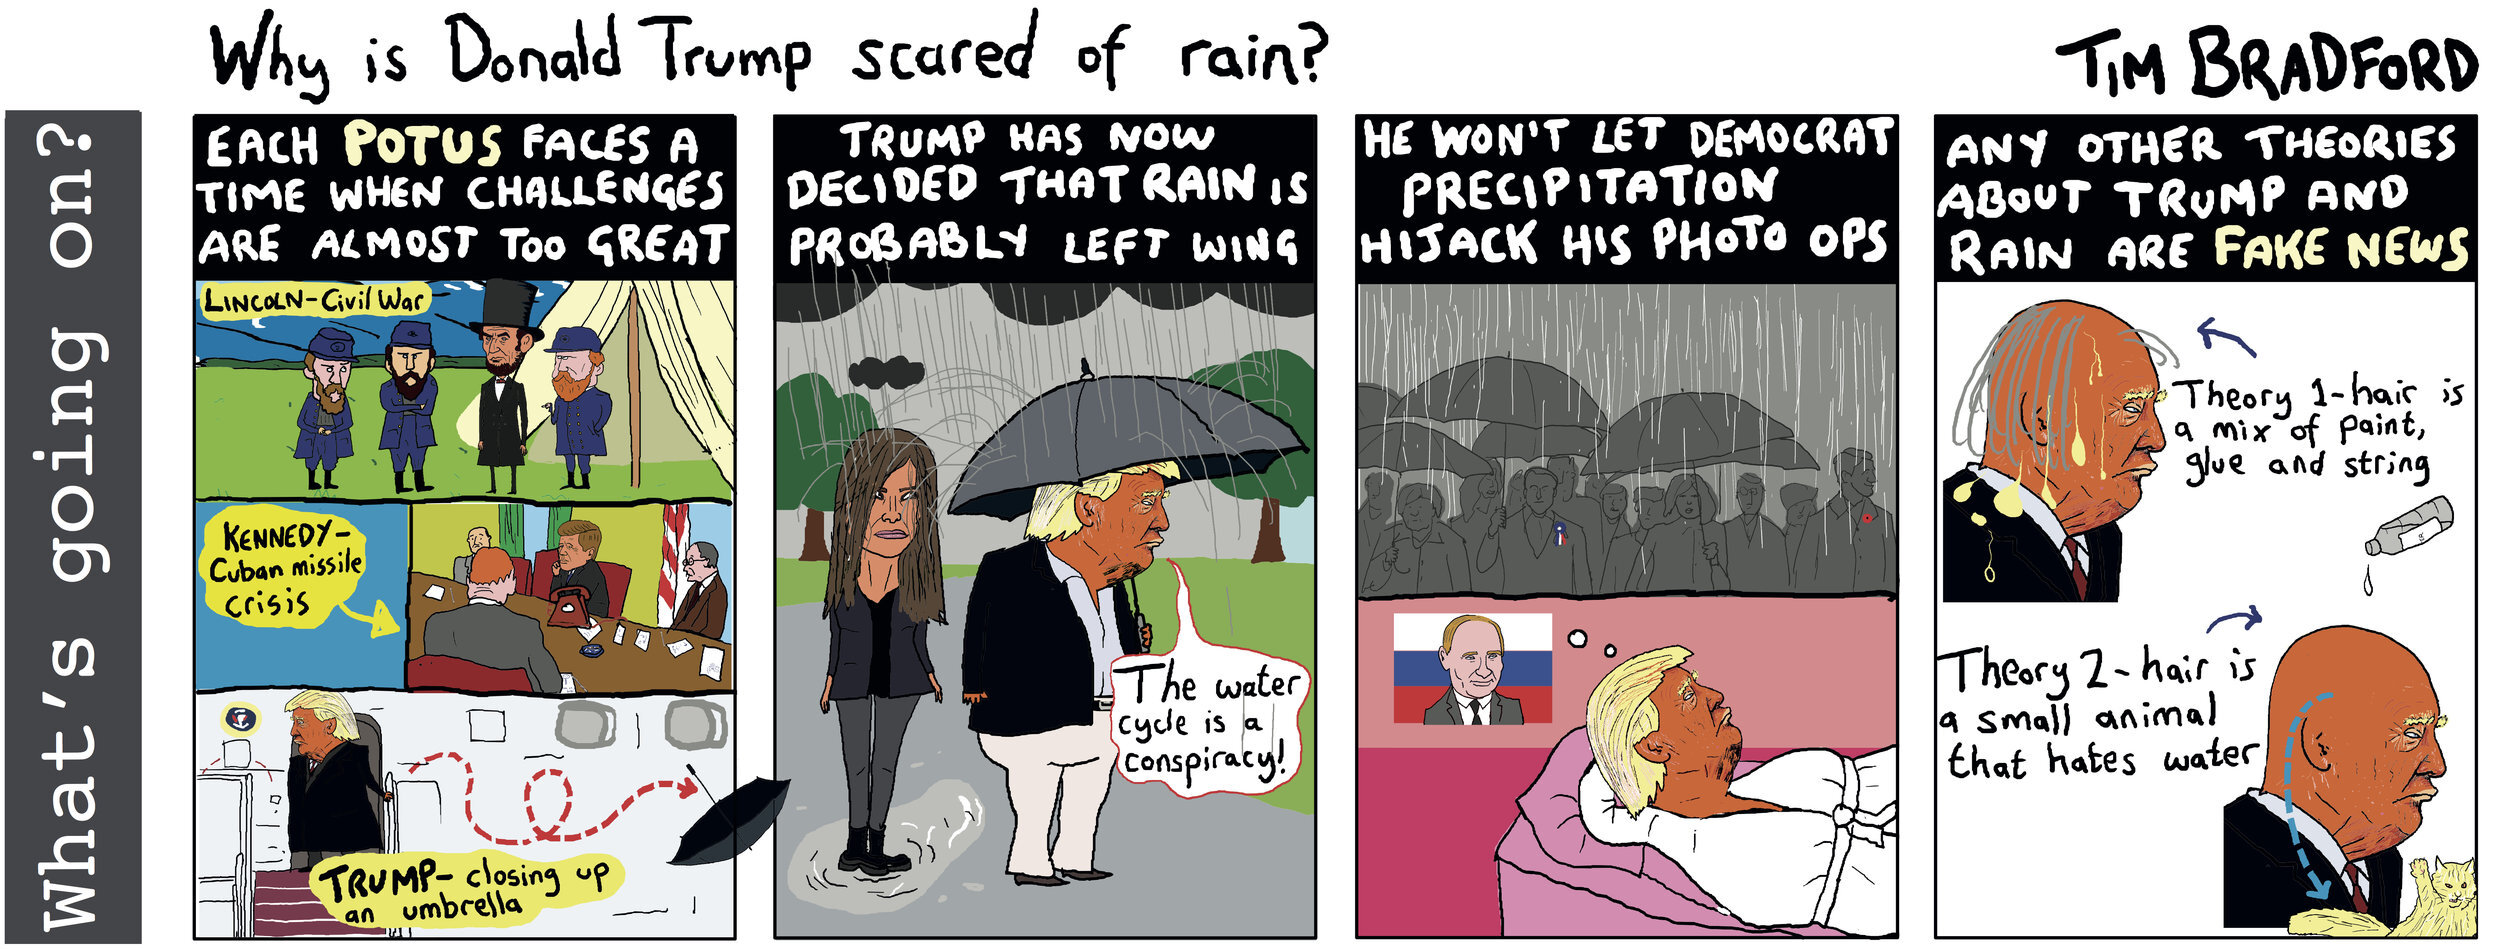 Why is Donald Trump scared of rain? - 13/11/2018